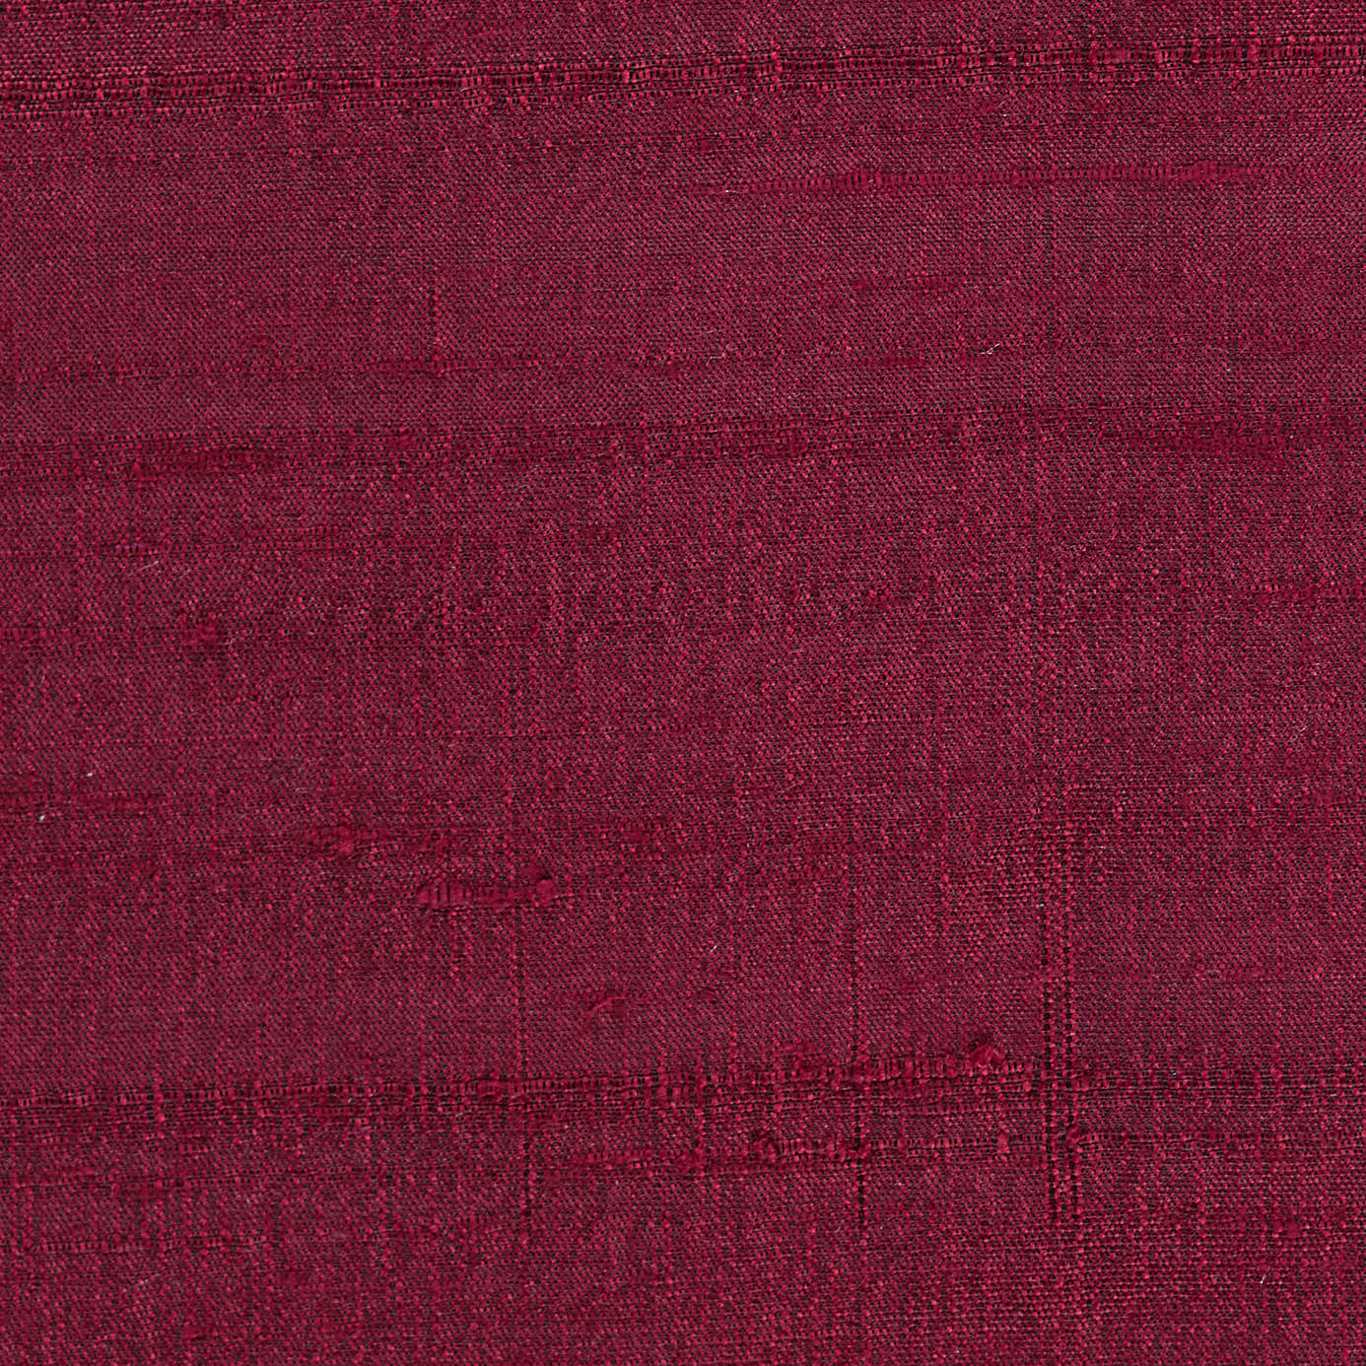 Laminar Cranberry Fabric by HAR